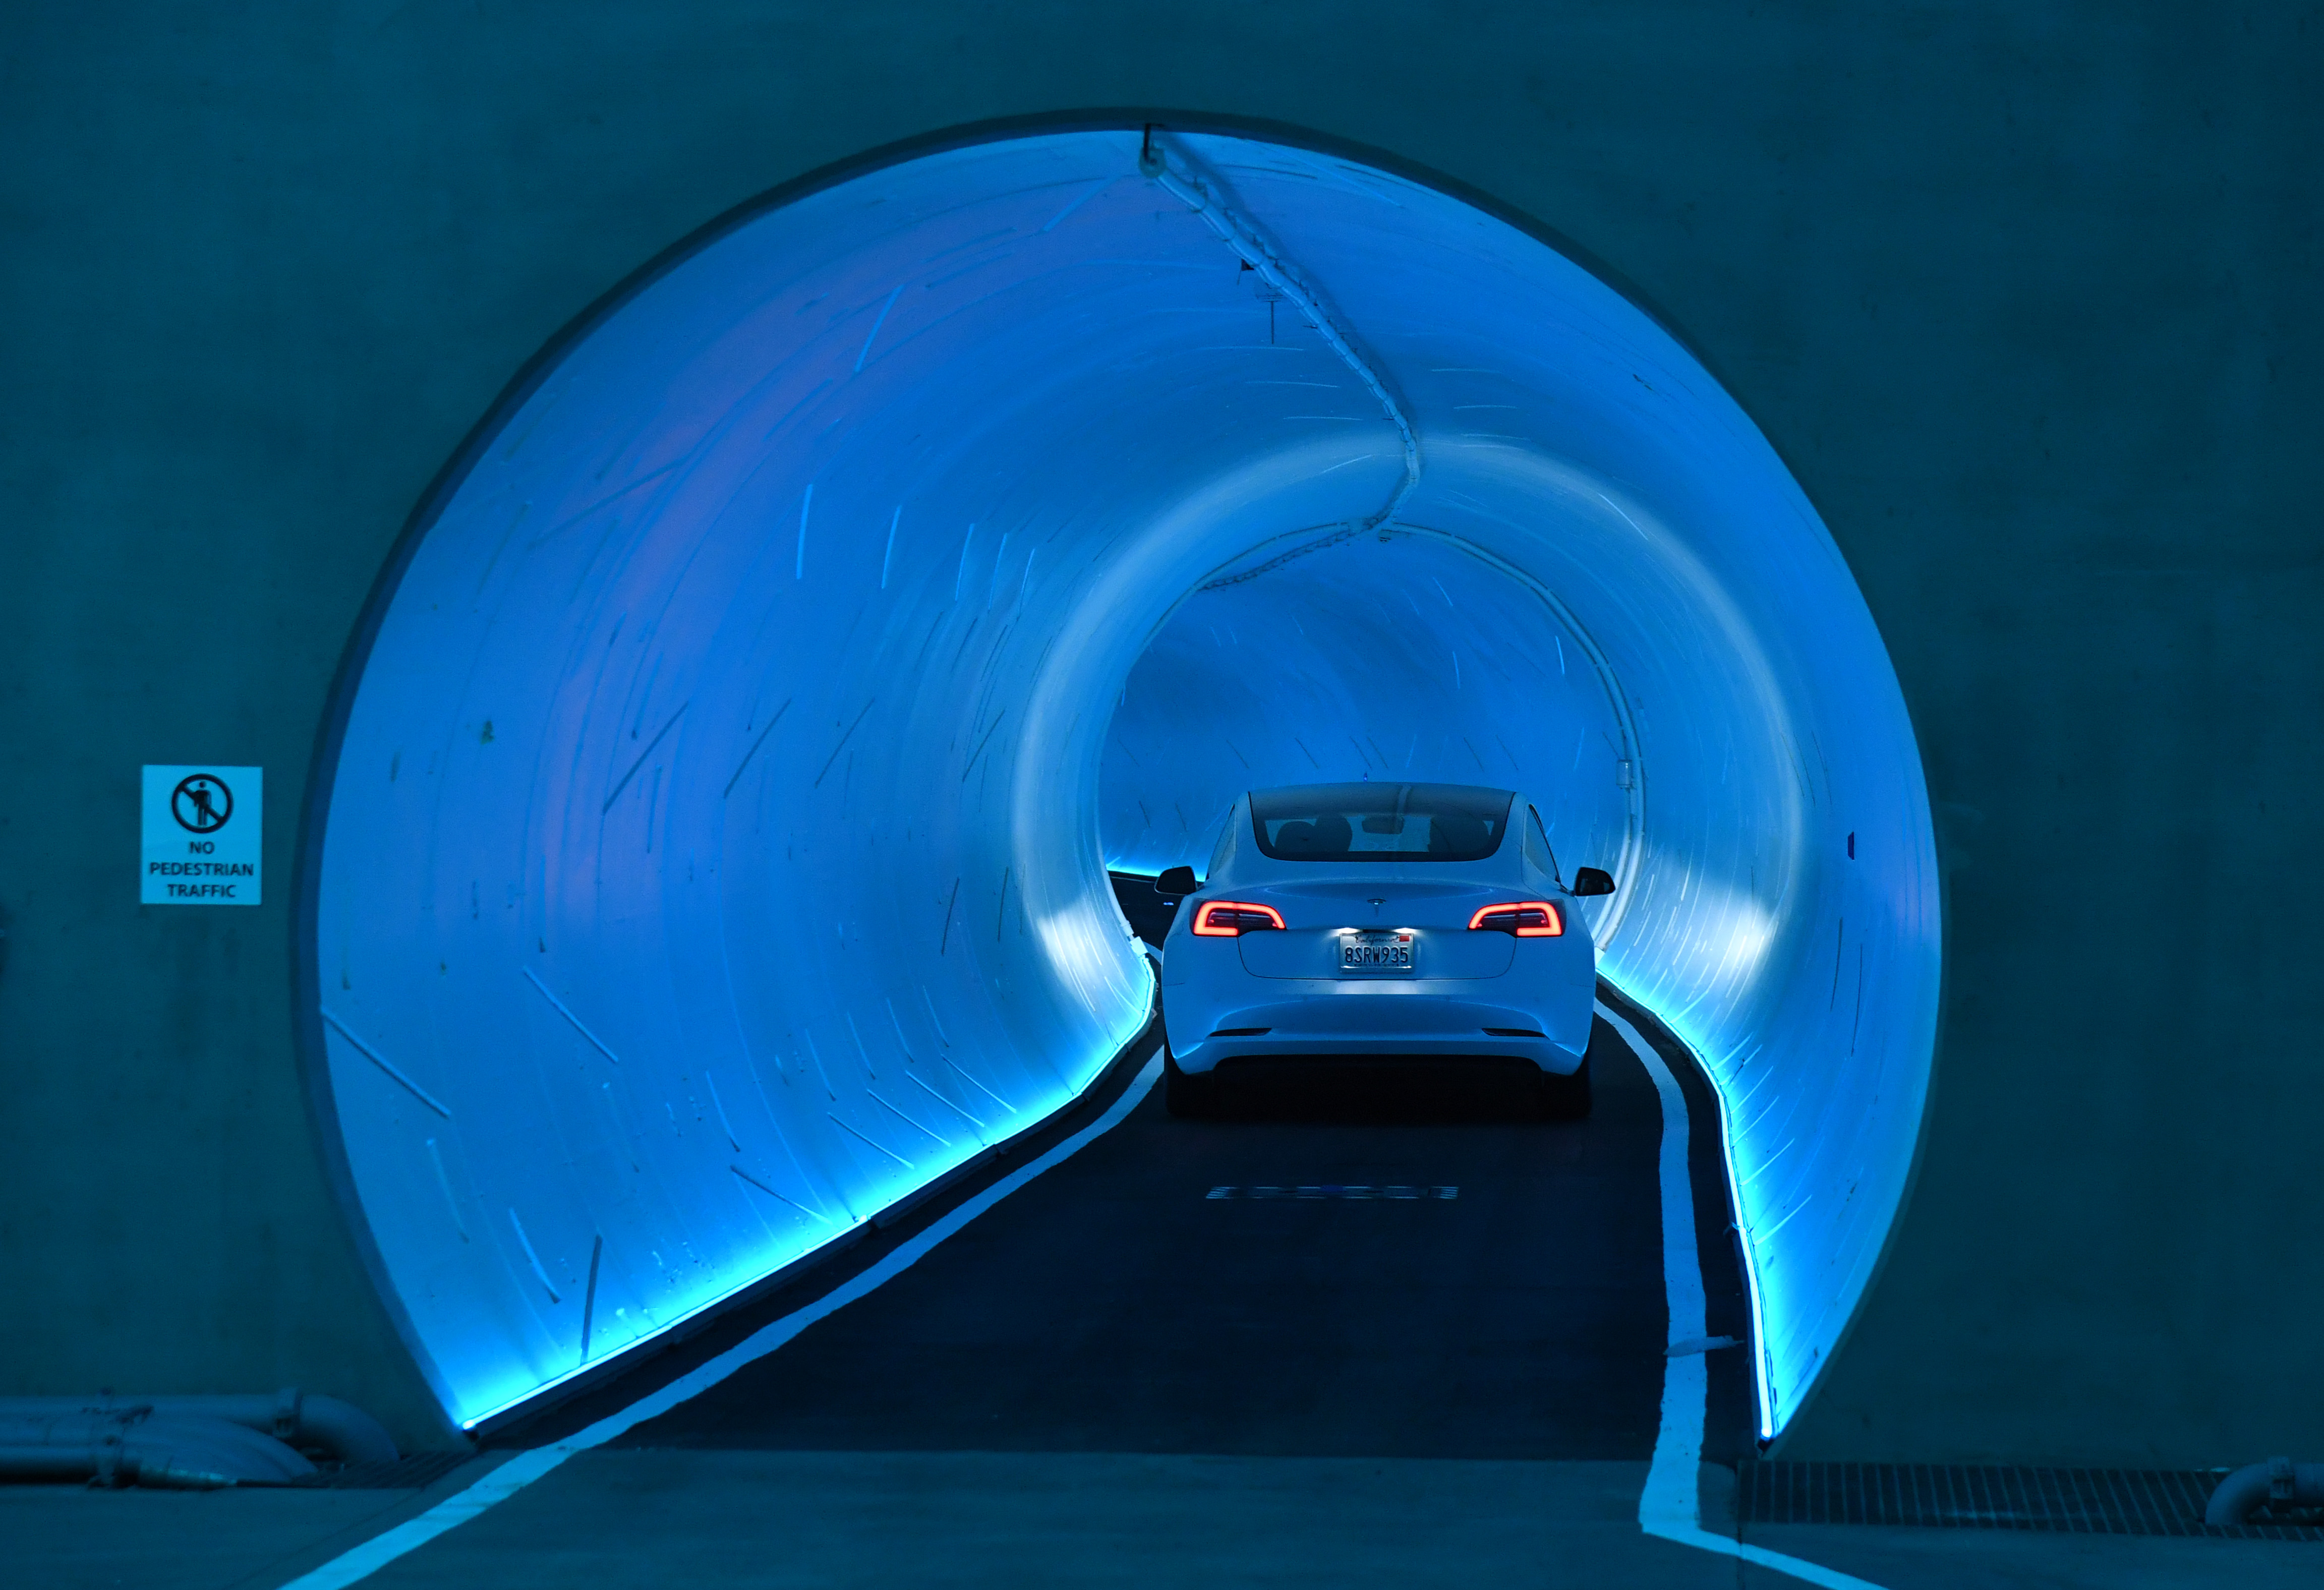 How's this for a cool job - designing tunnels for a living